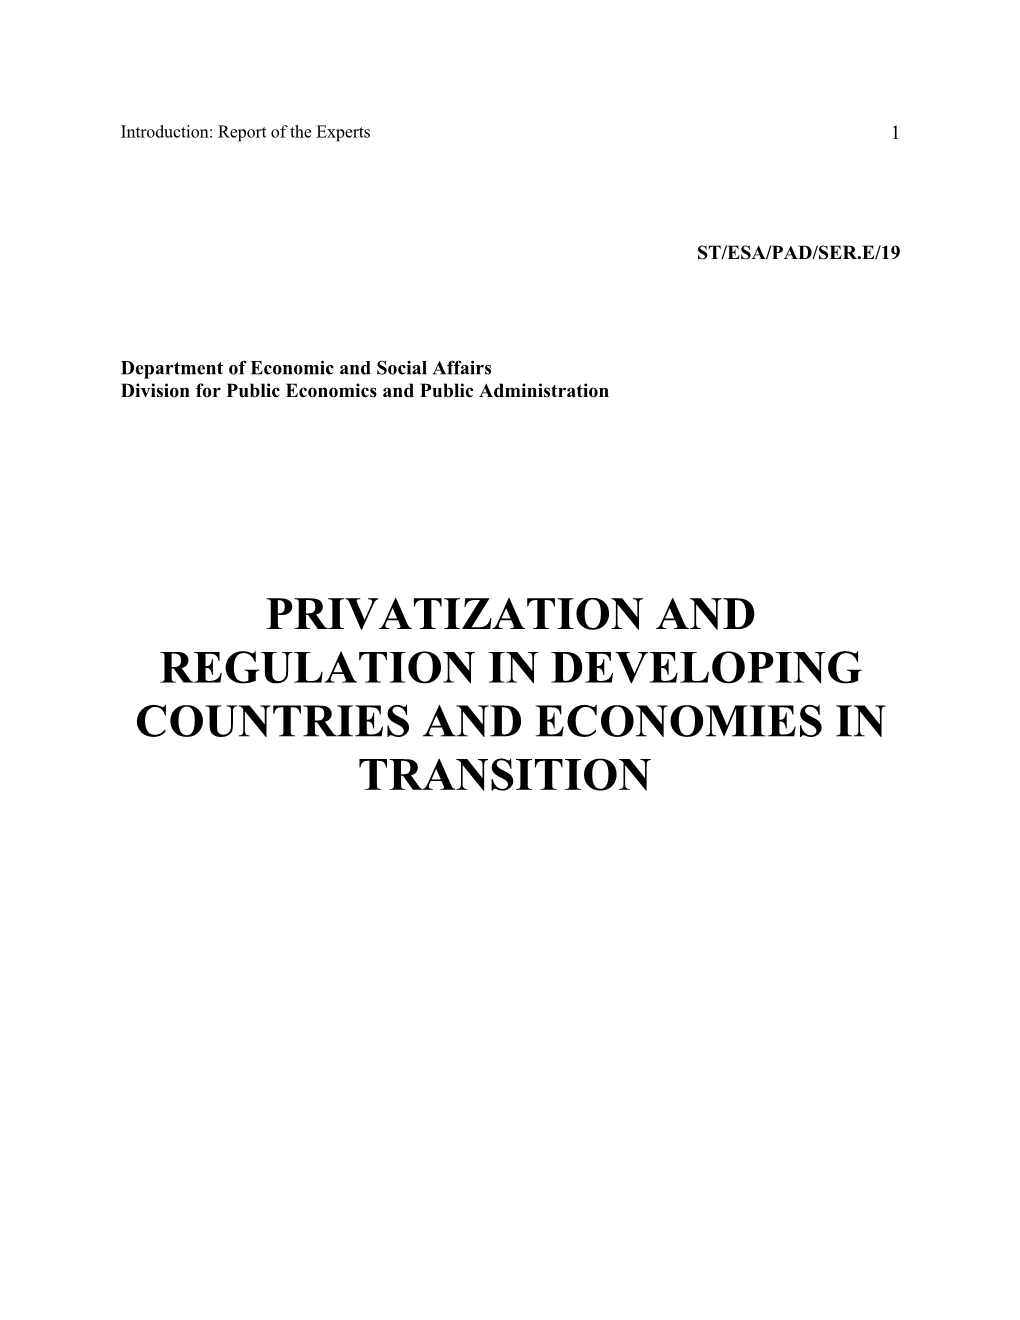 PRIVATIZATION and REGULATION in DEVELOPING COUNTRIES and ECONOMIES in TRANSITION 2Introduction: Report of the Experts